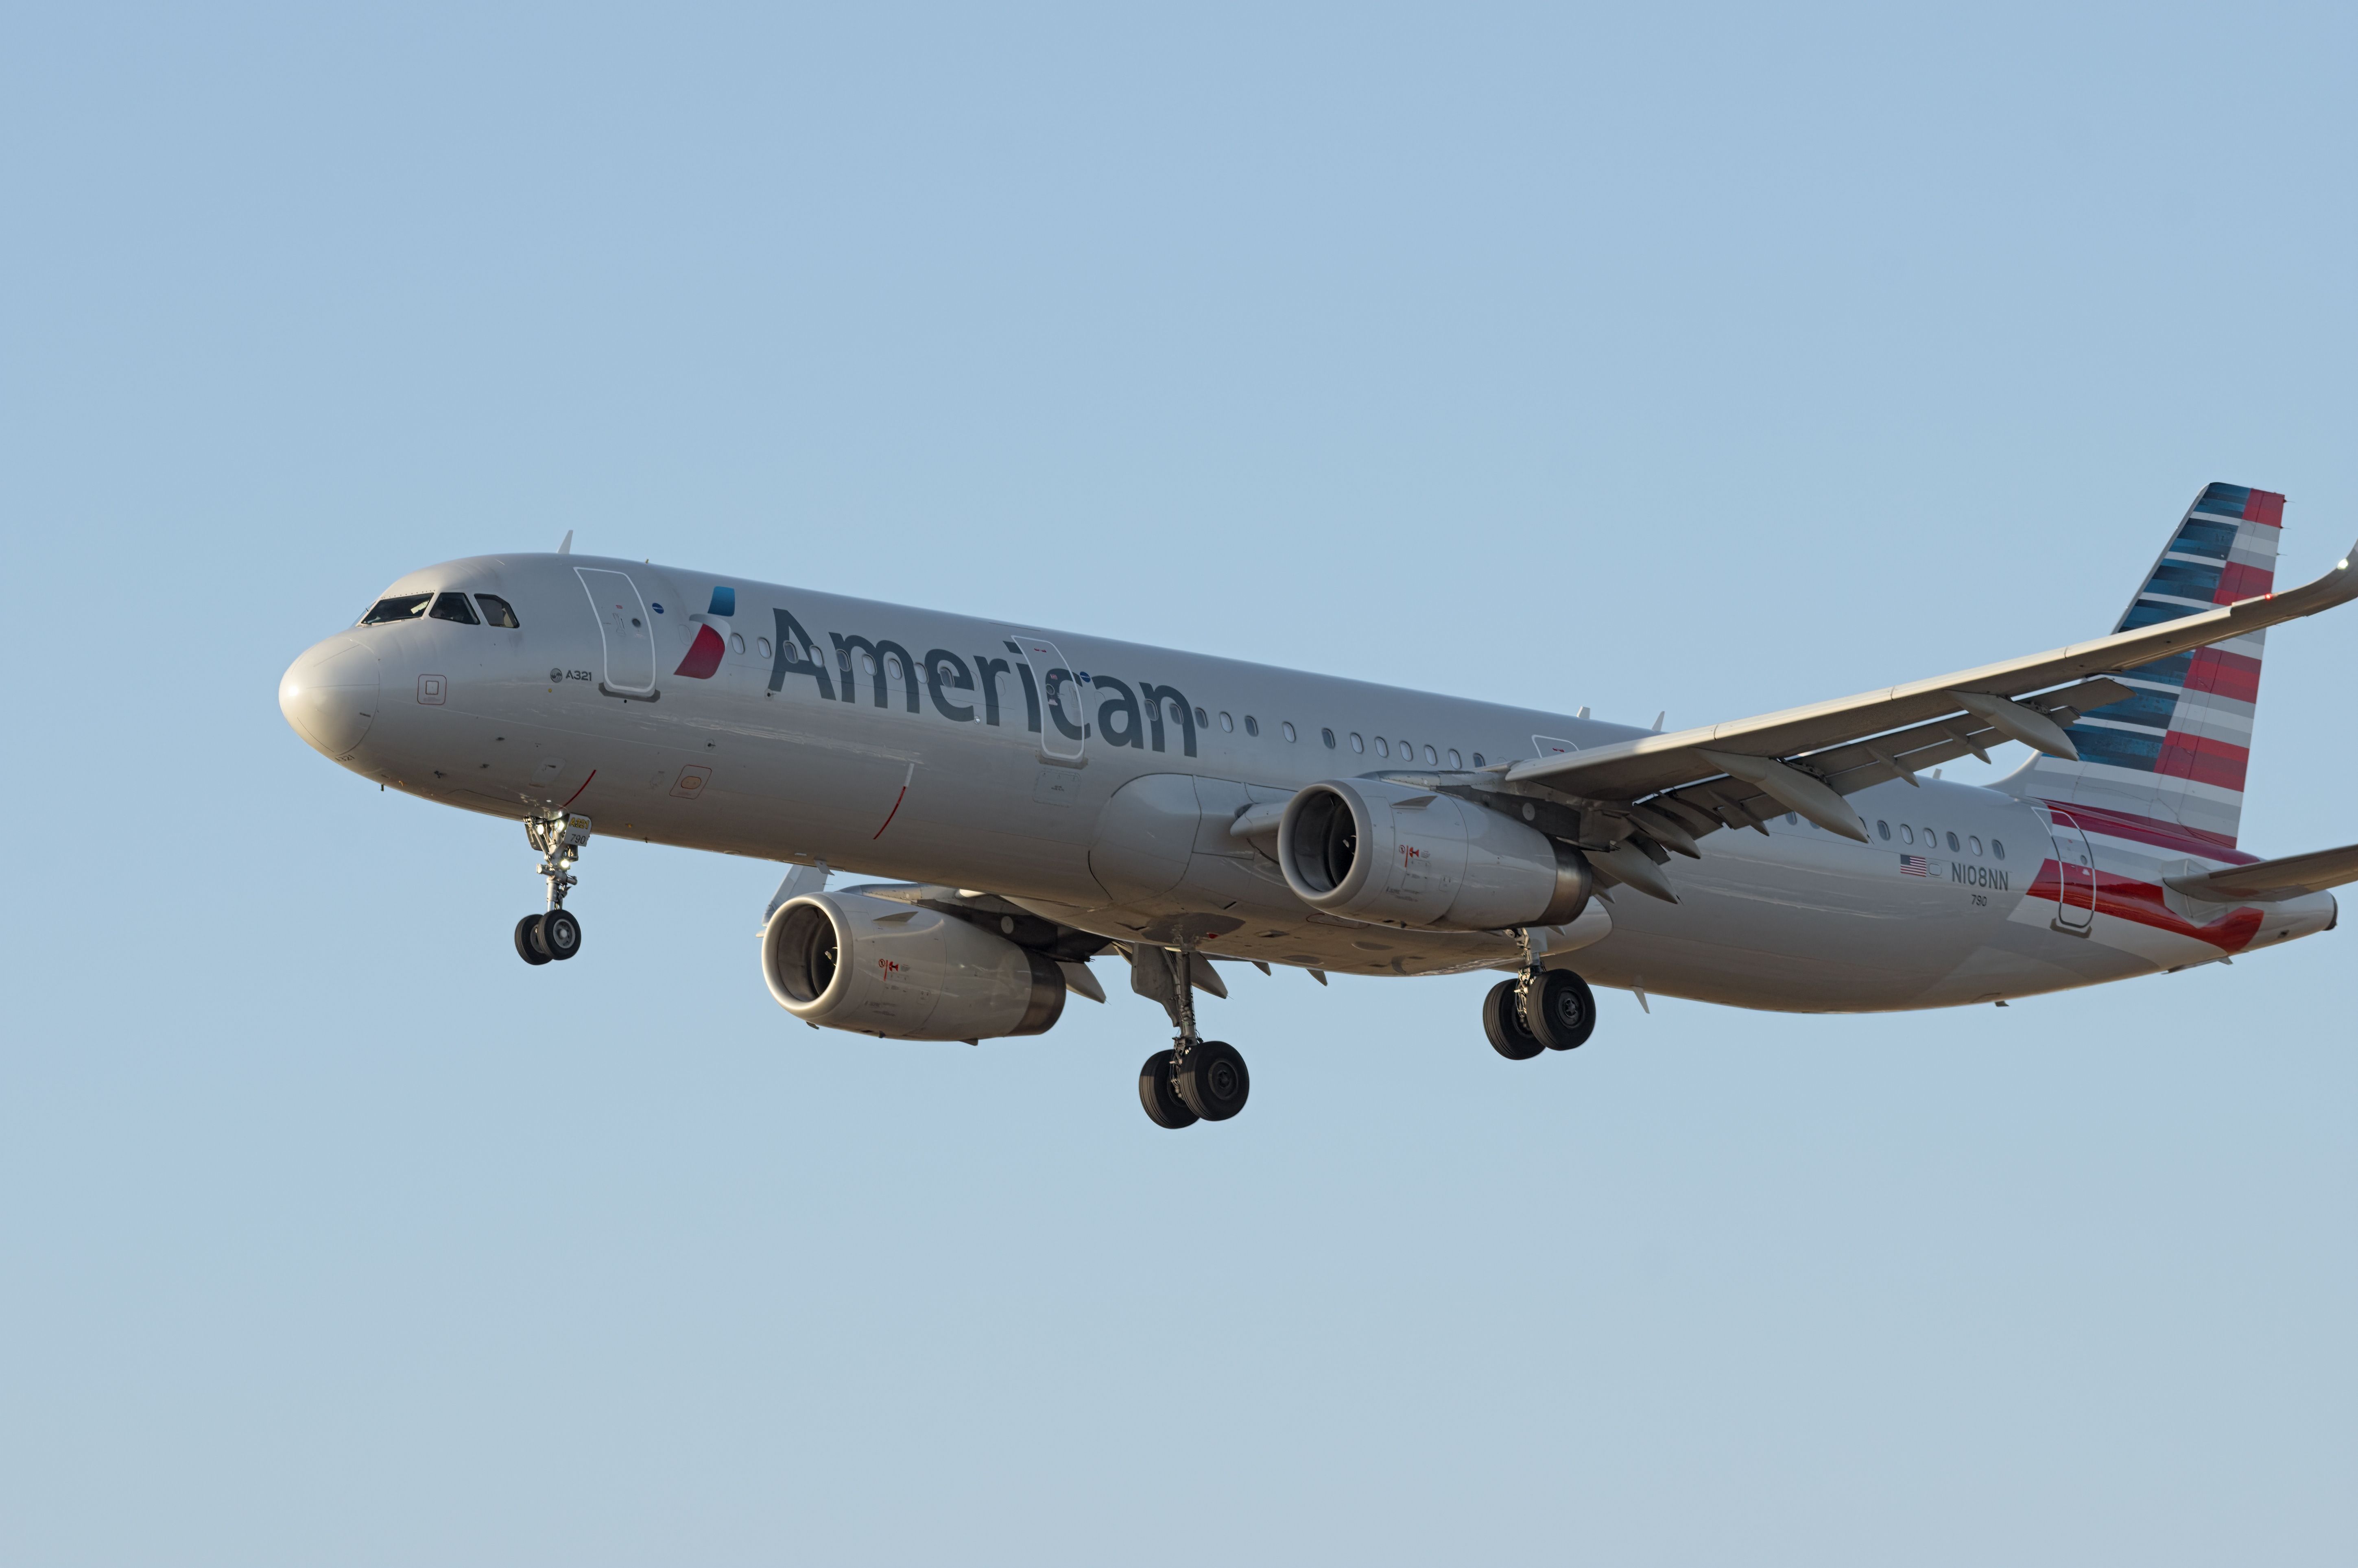 An American Airlines Airbus A321-231 flying in the sky.